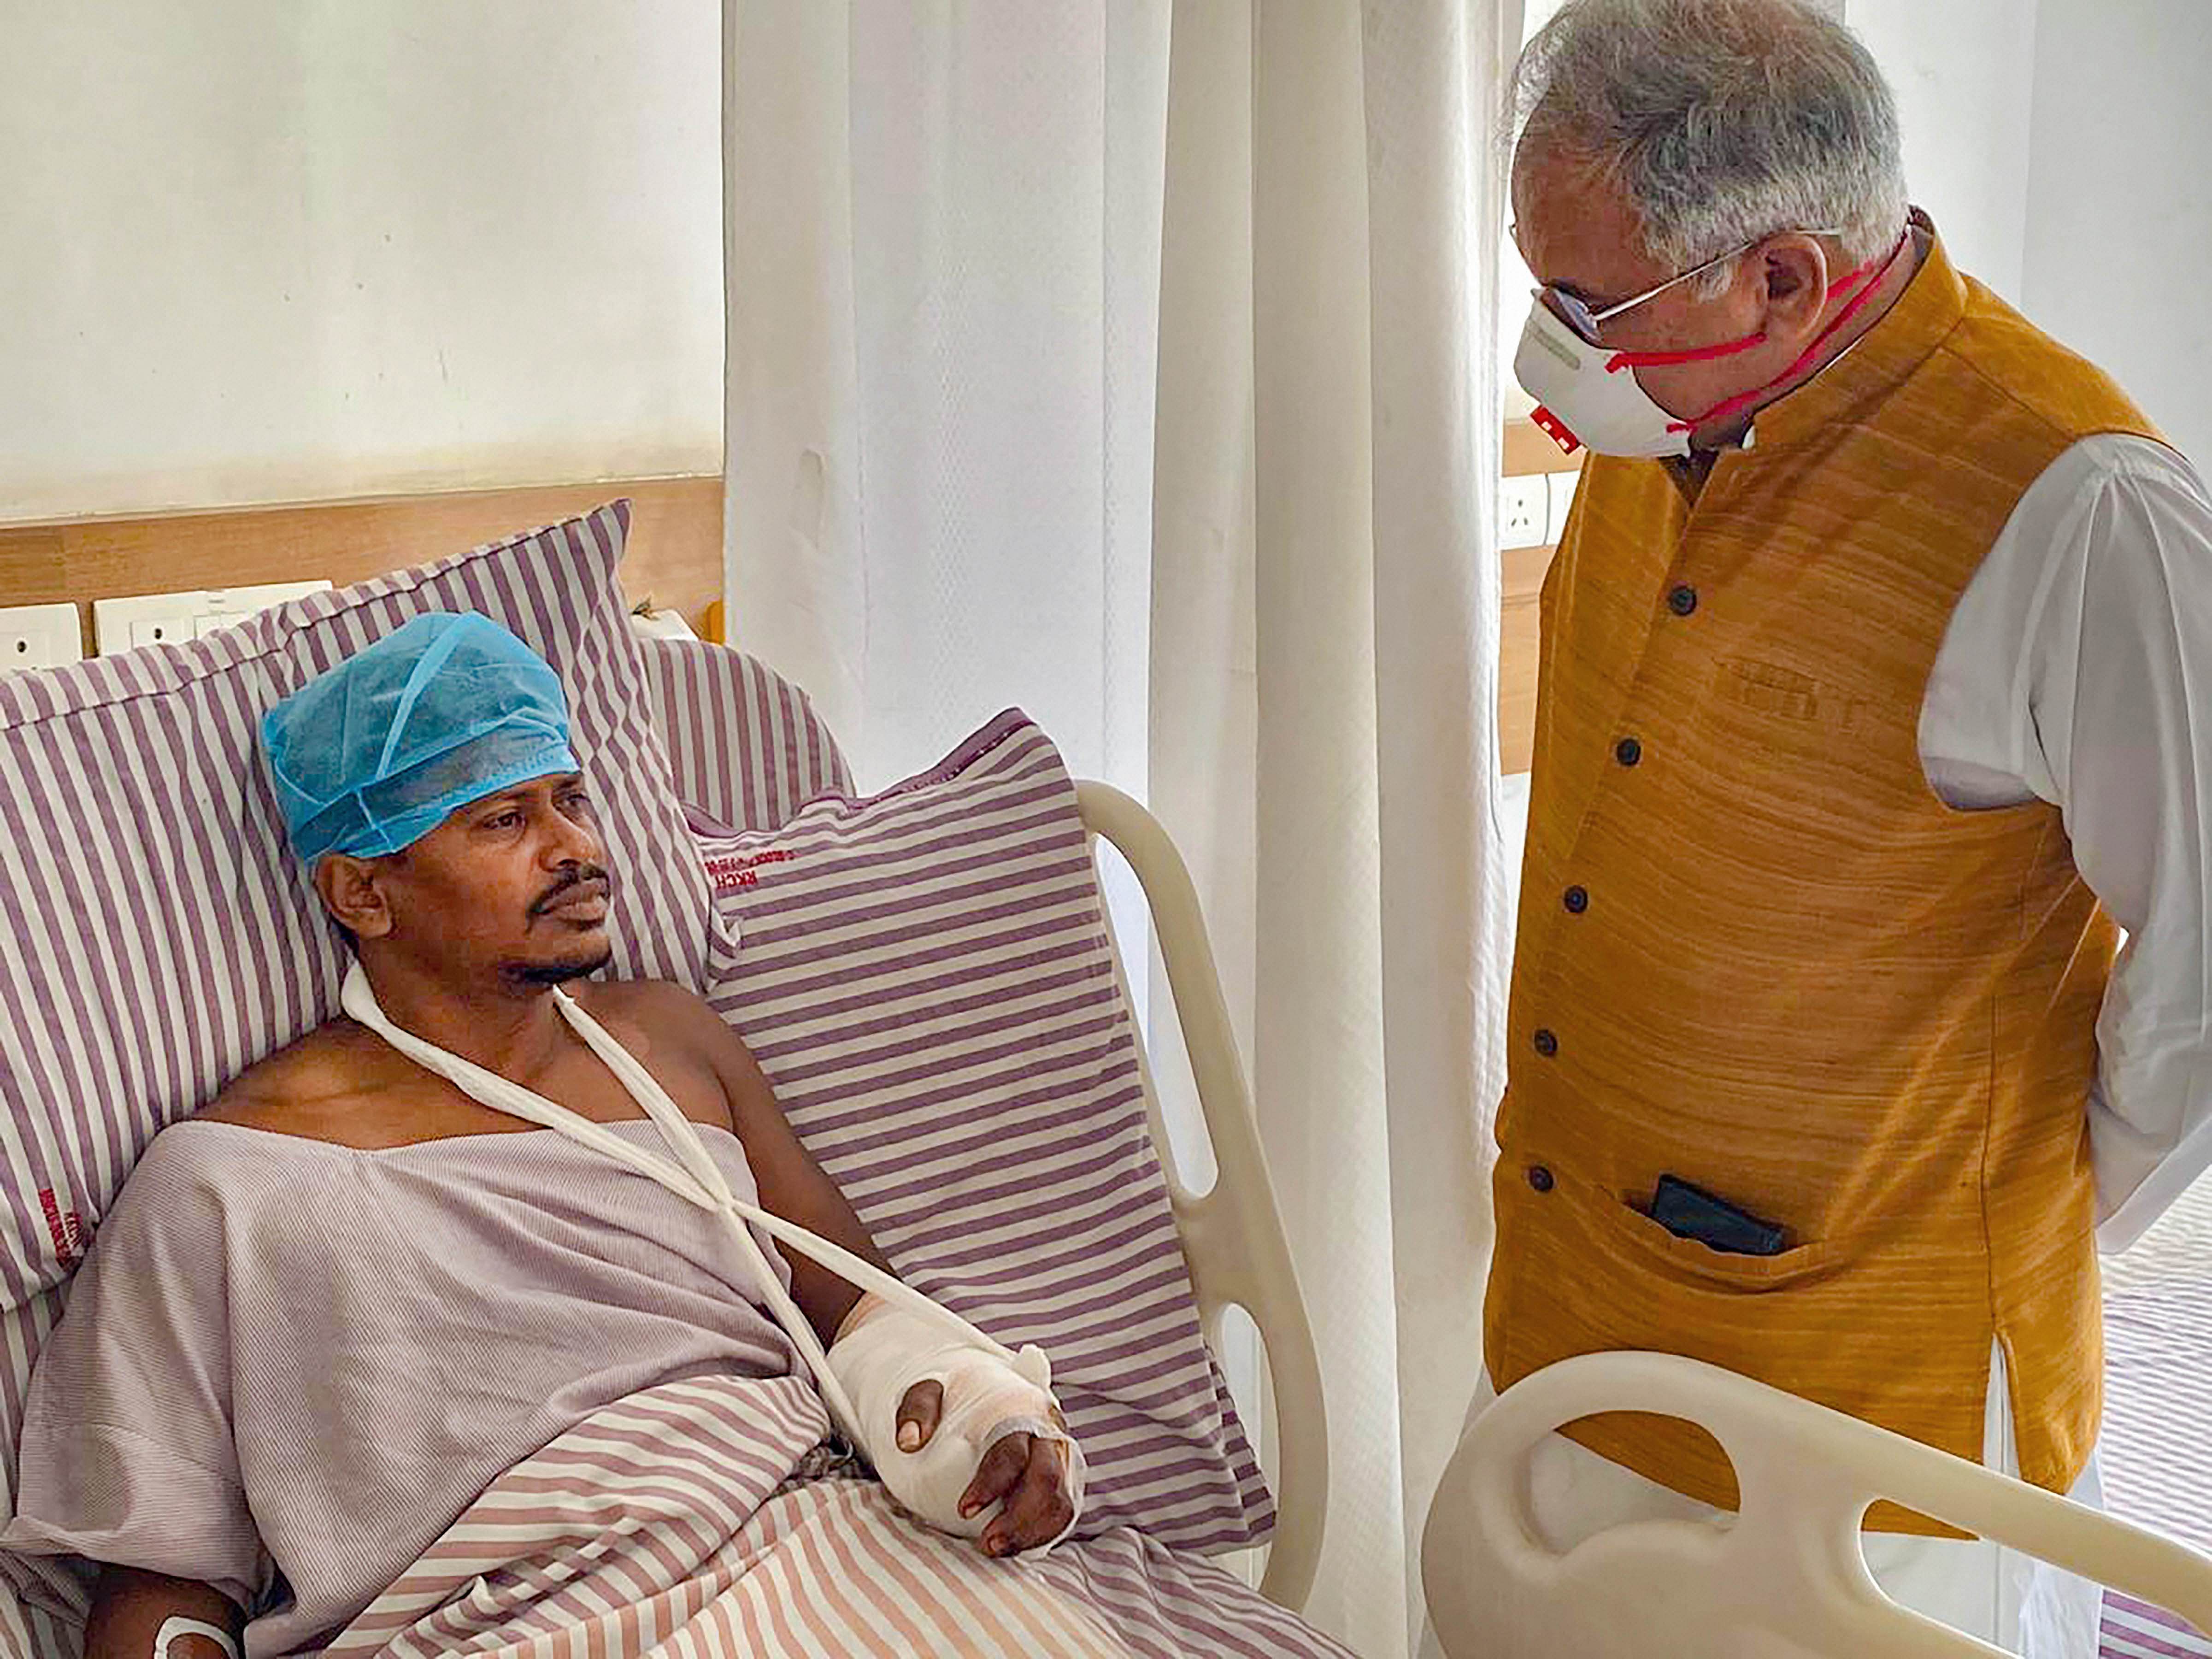 Chhattisgarh Chief Minister Bhupesh Baghel meets injured police personnel, at Ramkrishna Care Hospital in Raipur, Sunday, March 22, 2020. (Credit: PTI Photo)